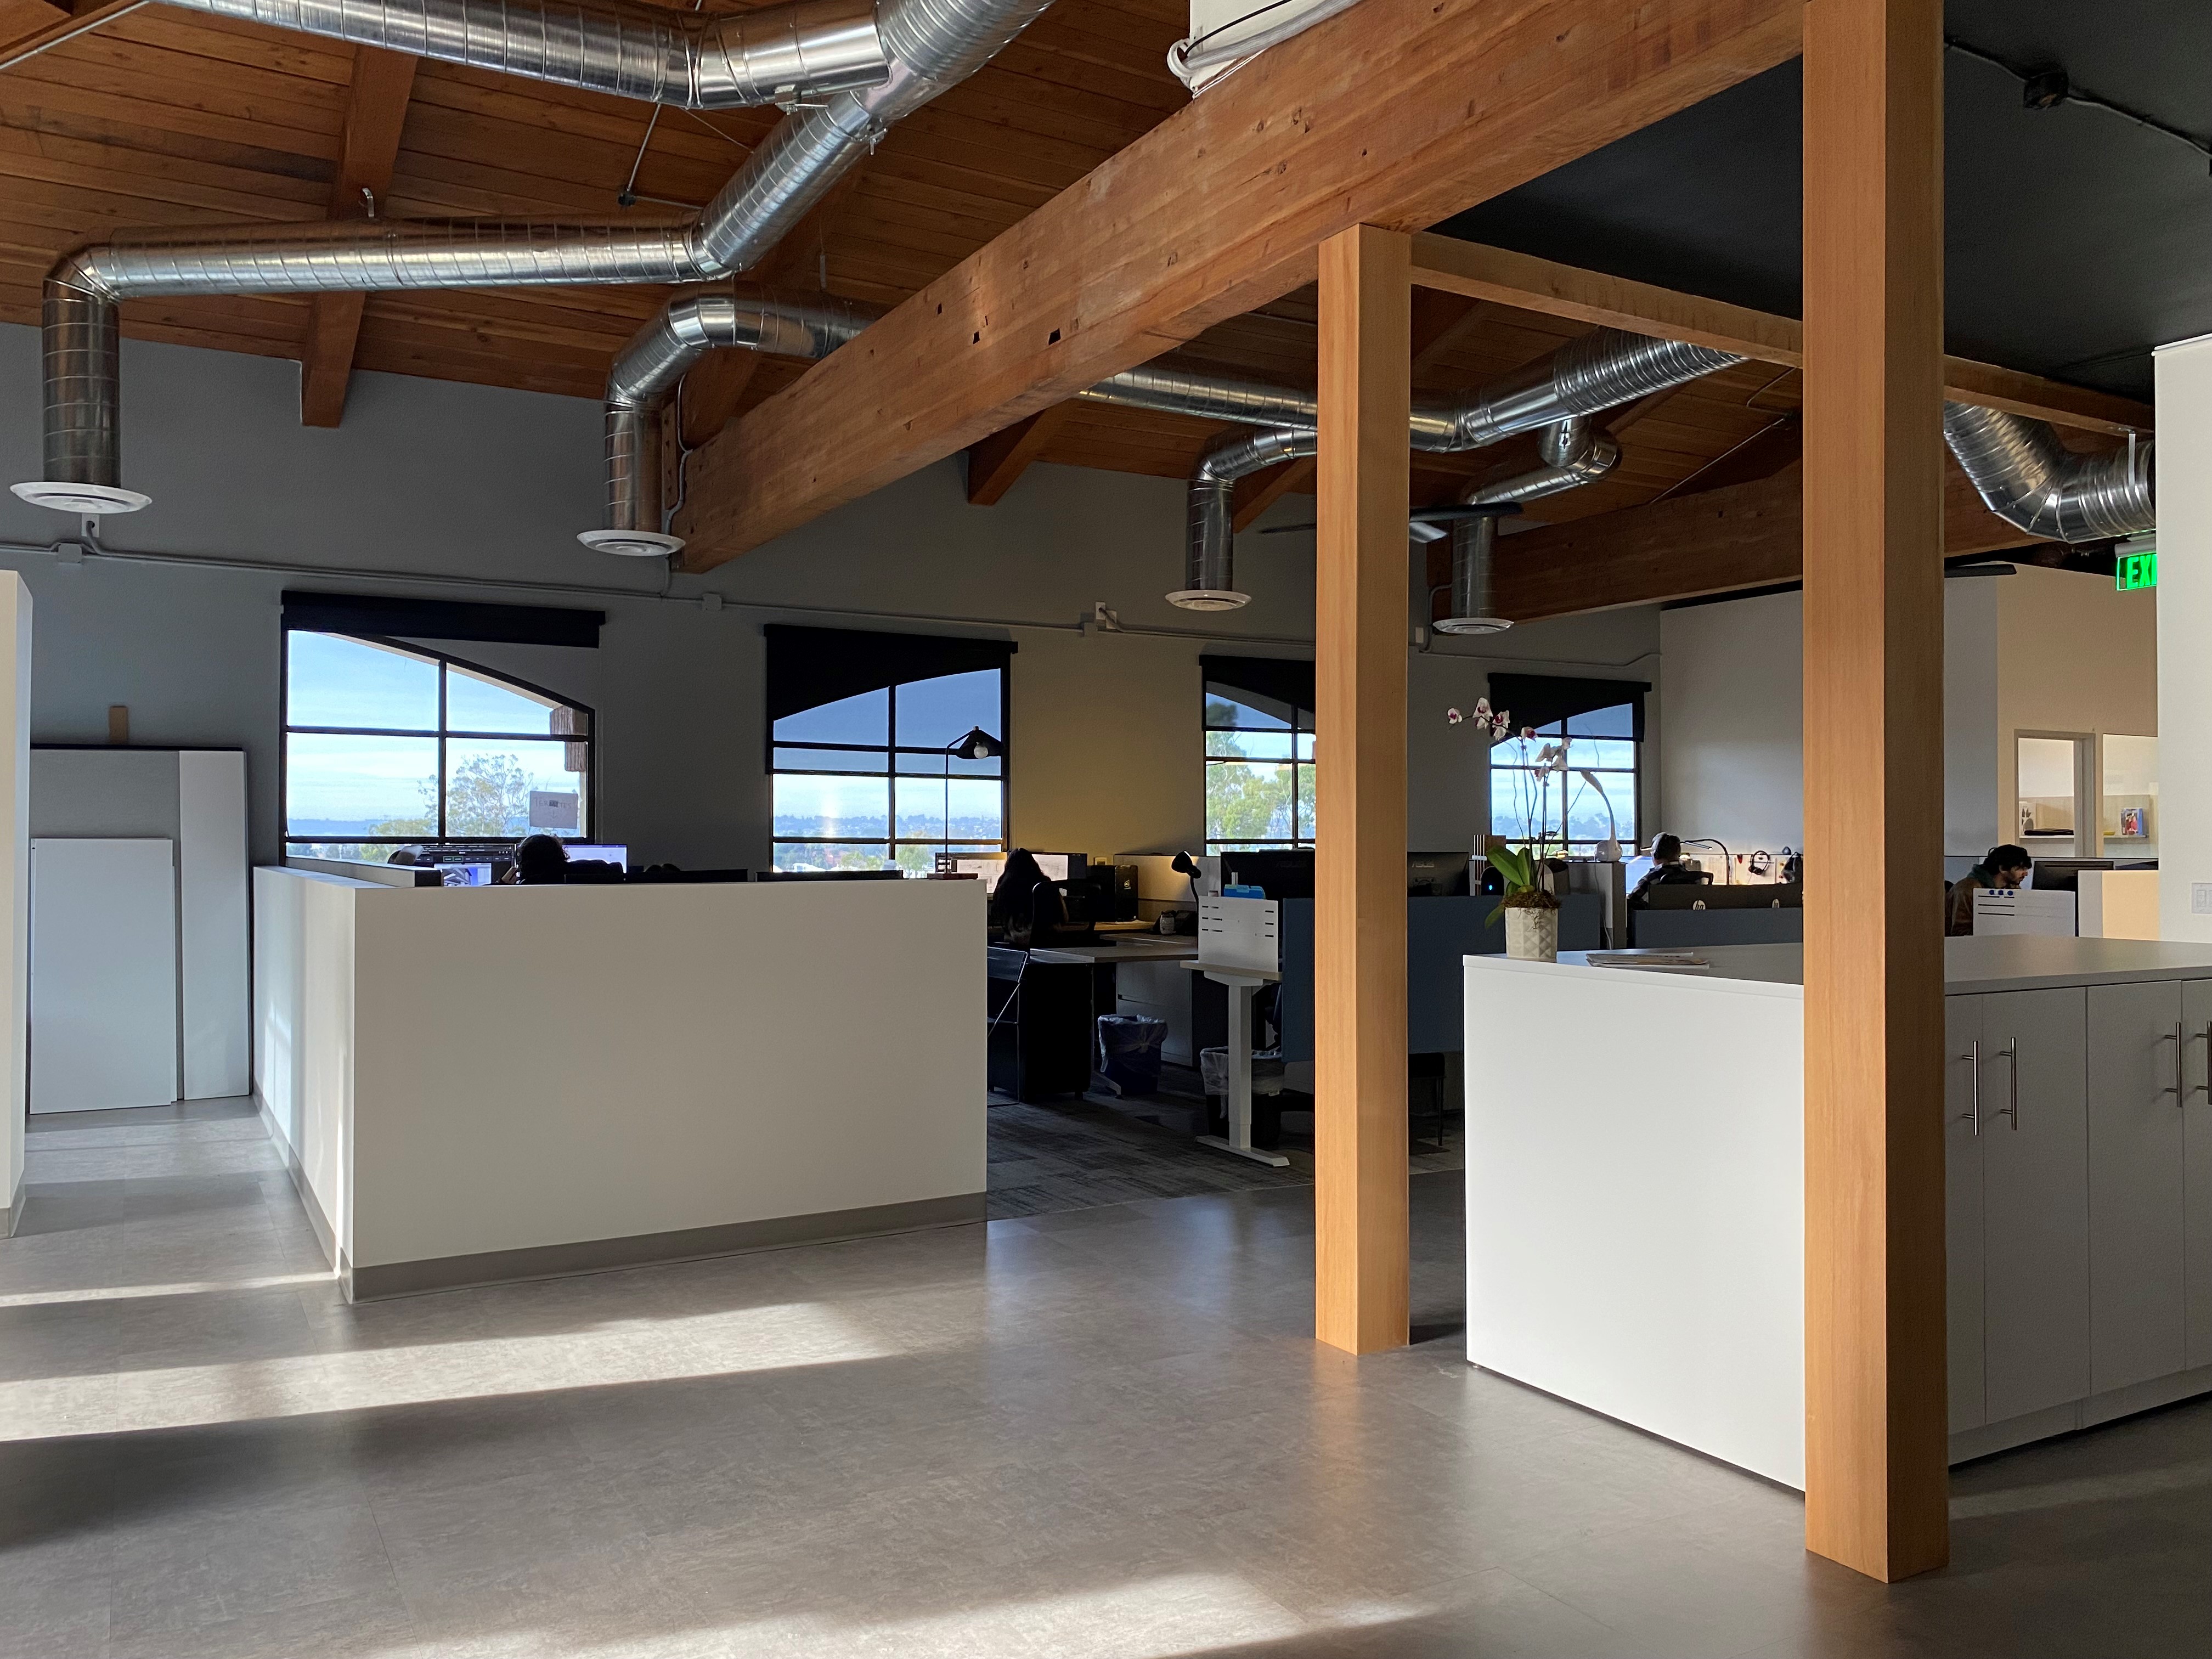 platt-whitelaw-architects-moves-office-from-north-park-to-old-town